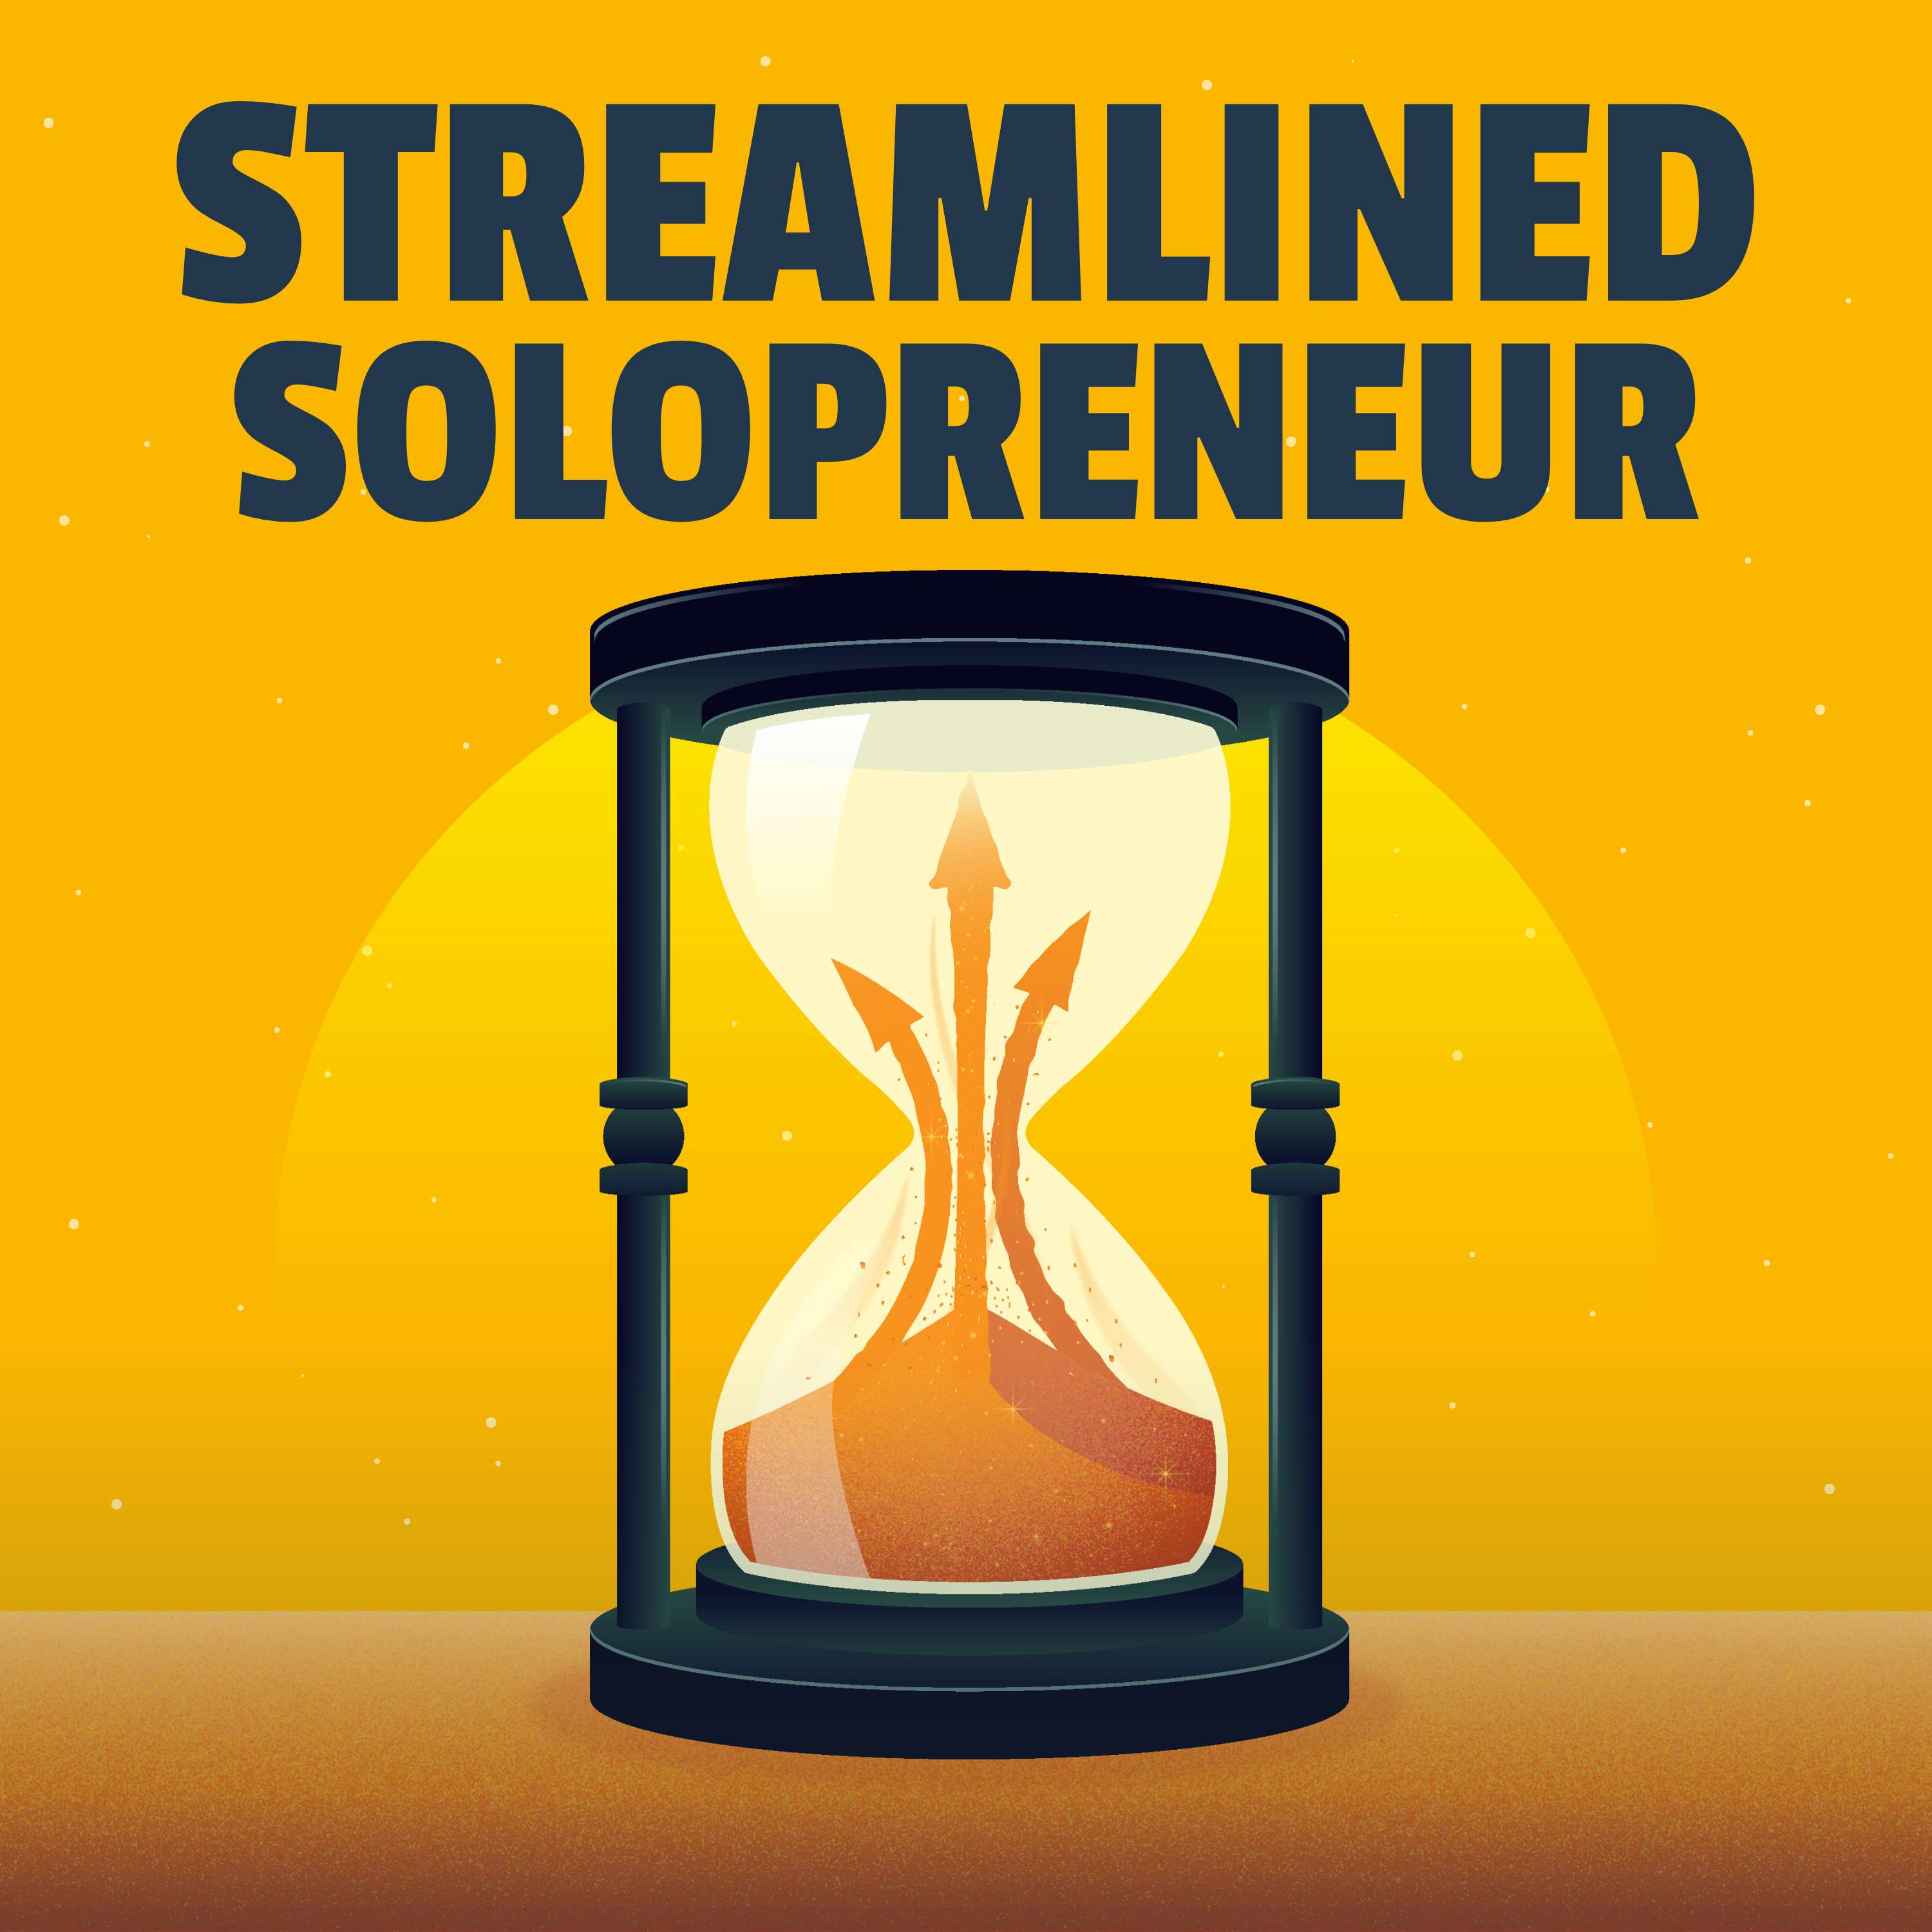 Streamlined Solopreneur: Tips to Help Busy Business Owners Save Time